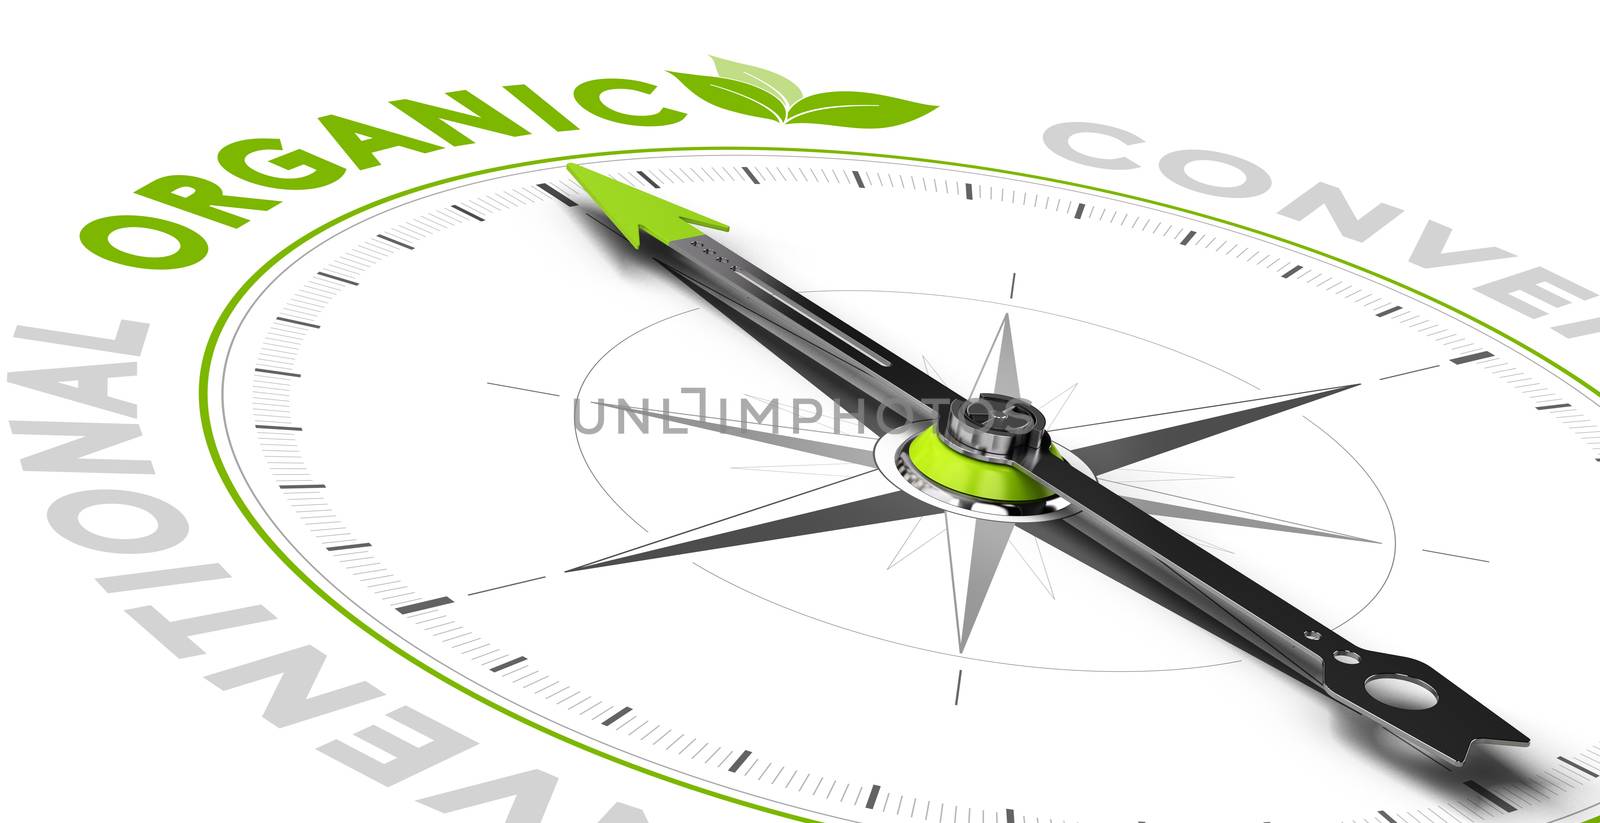 Compass with needle pointing the word organic. Green and grey tones over white background, Conceptual illustration for healthy eating and organic farming.